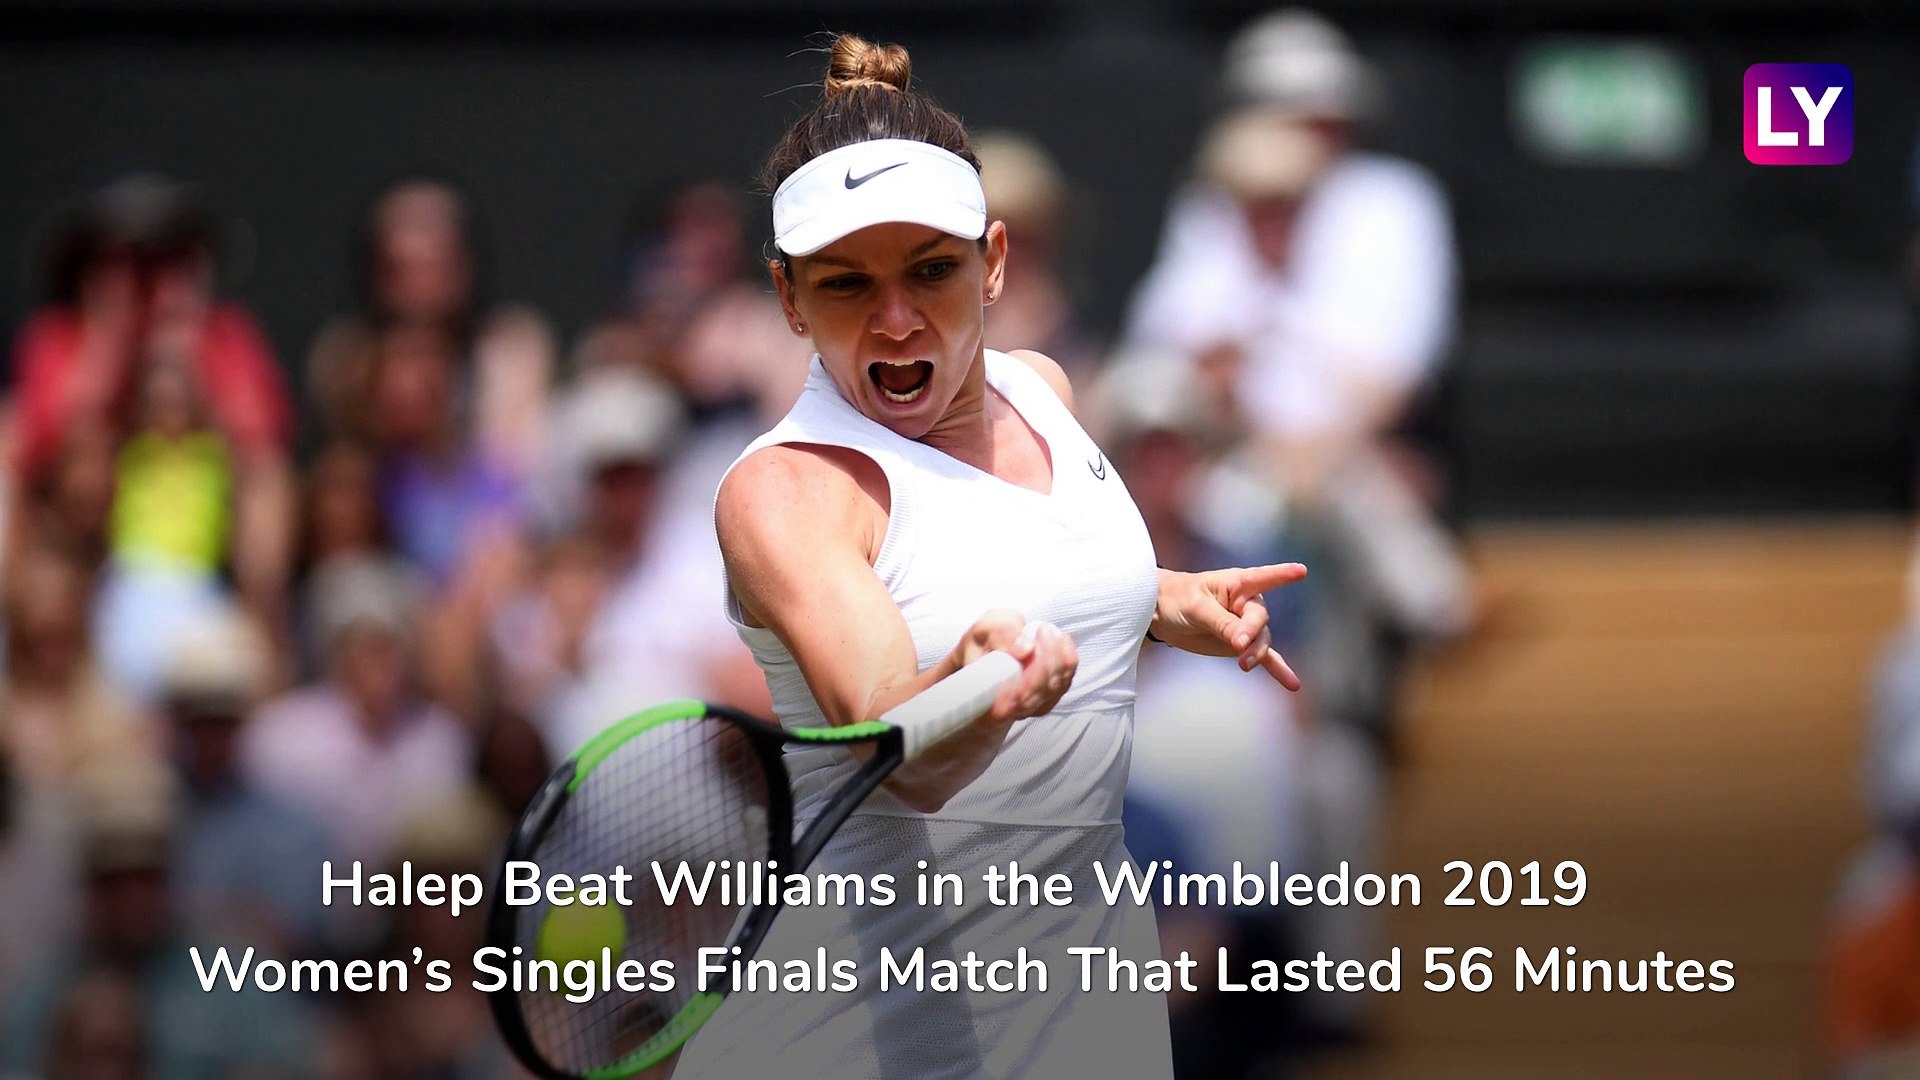 Wimbledon 2019 Womens Singles Results: Simona Halep Beats Serena Williams  in Finals - video Dailymotion